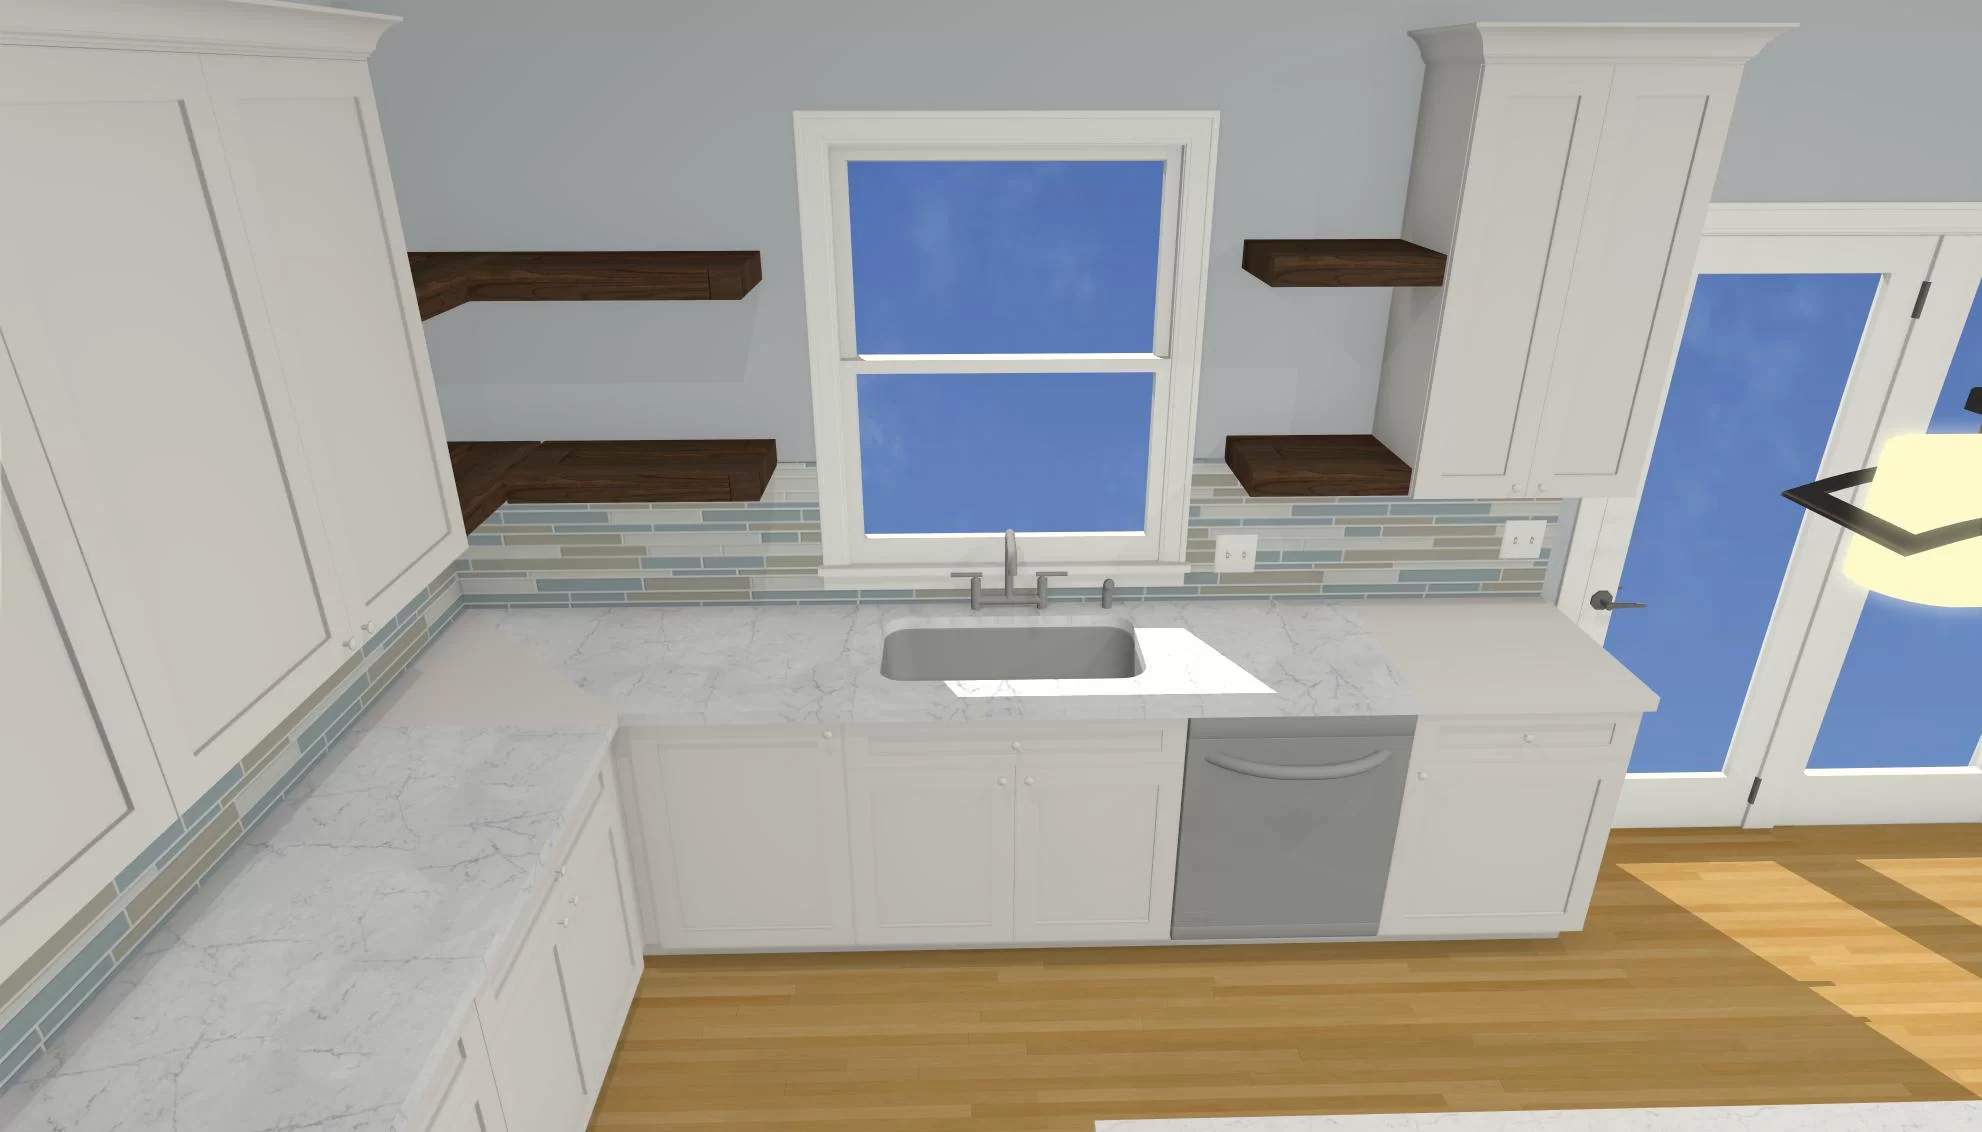 Kitchen 3D with floating shelves flanking window